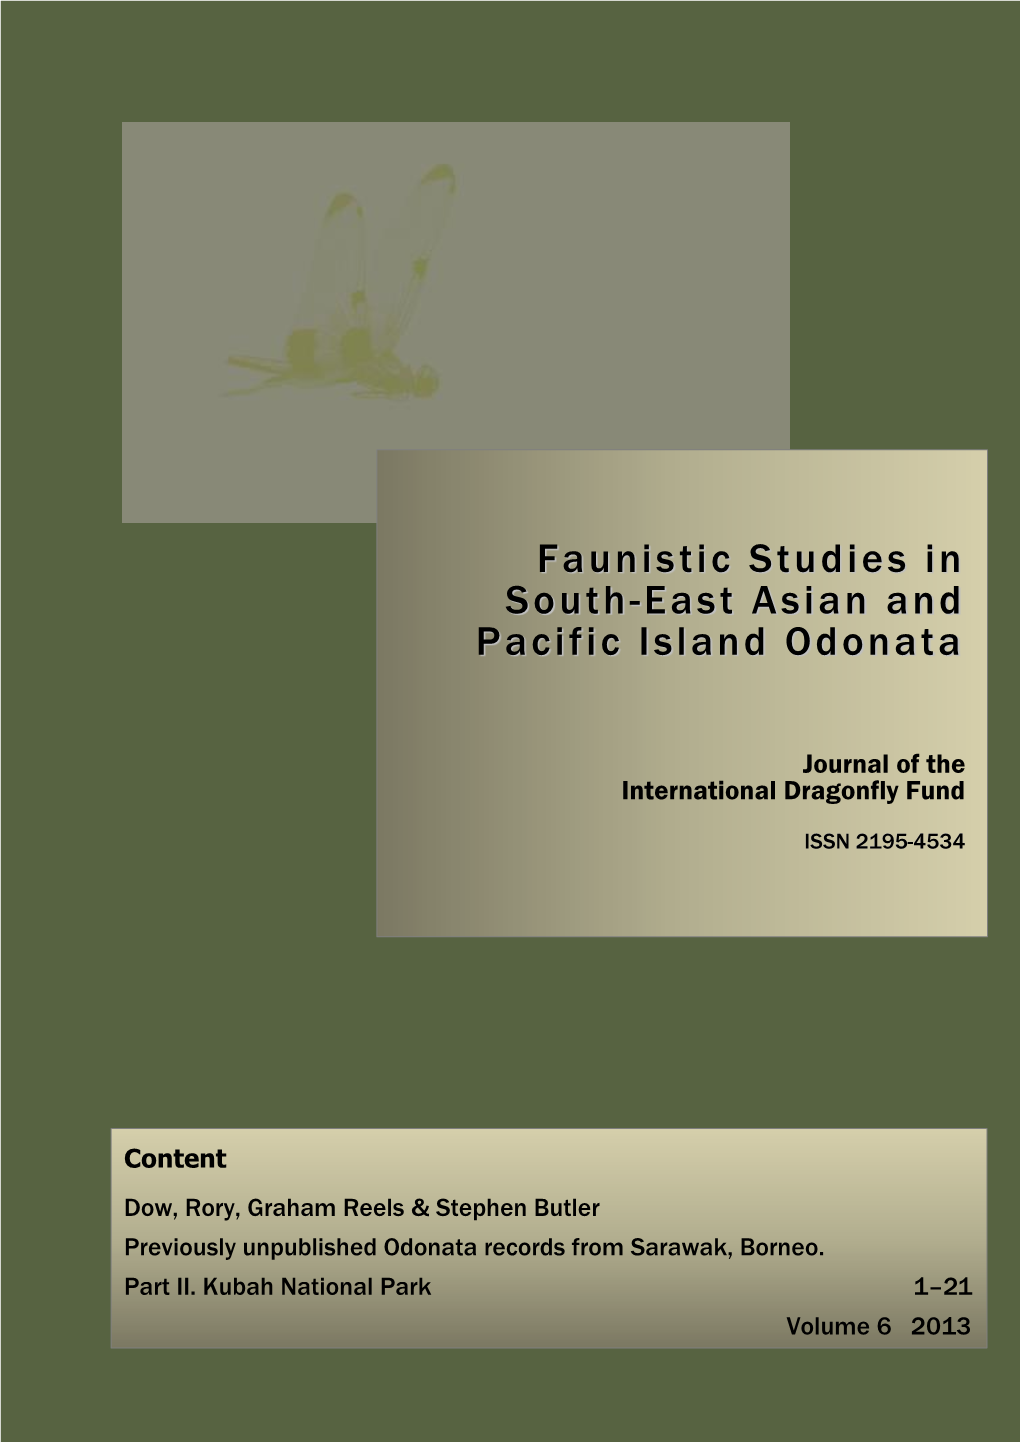 Faunistic Studies in South-East Asian and Pacific Island Odonata